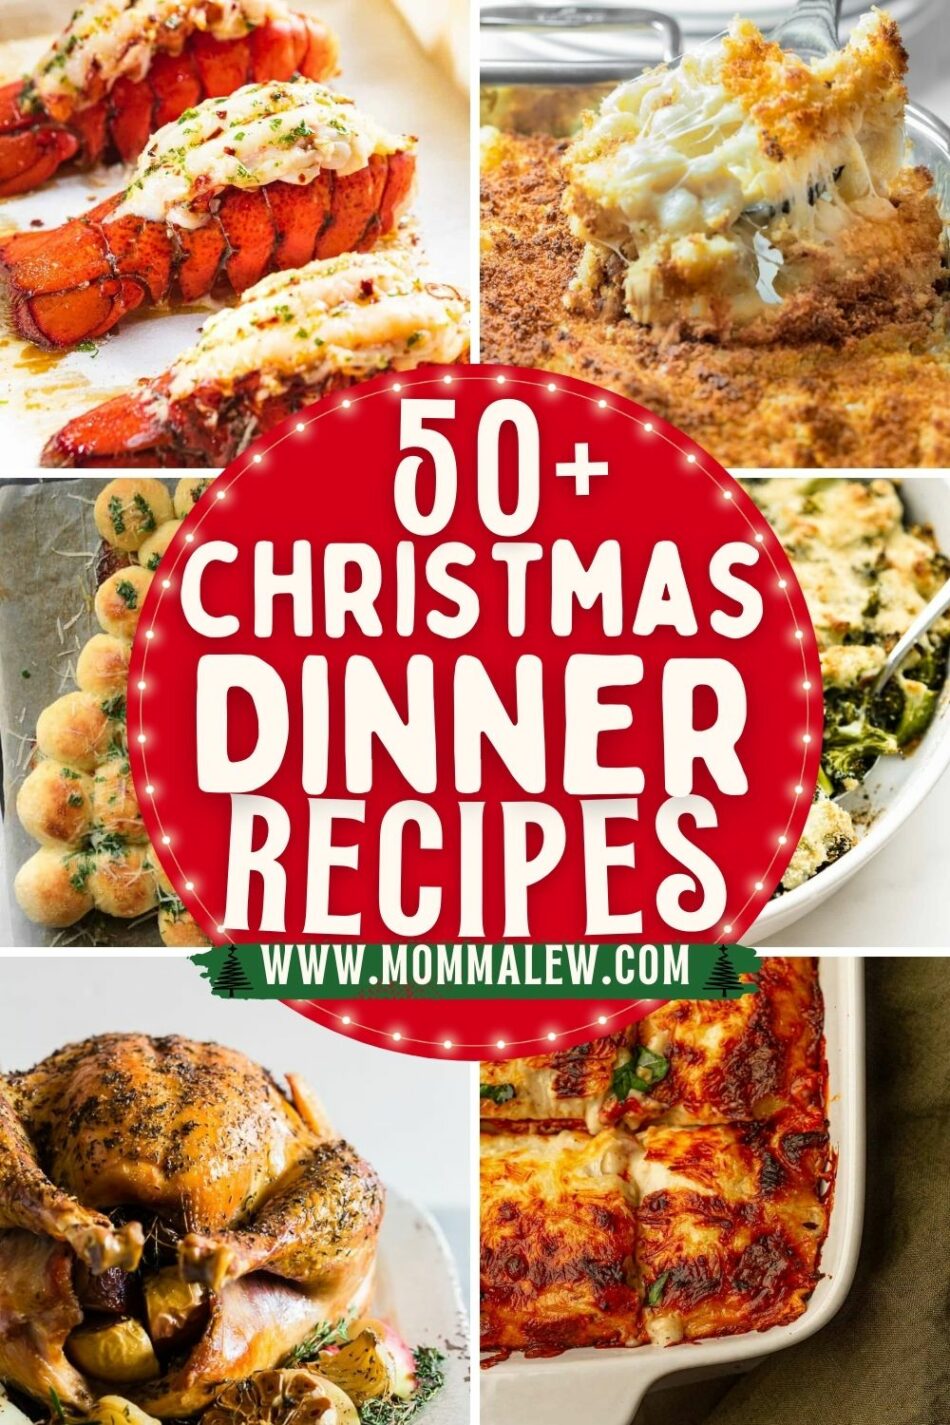 Celebrate the holidays with The Best Christmas Dinner Ideas